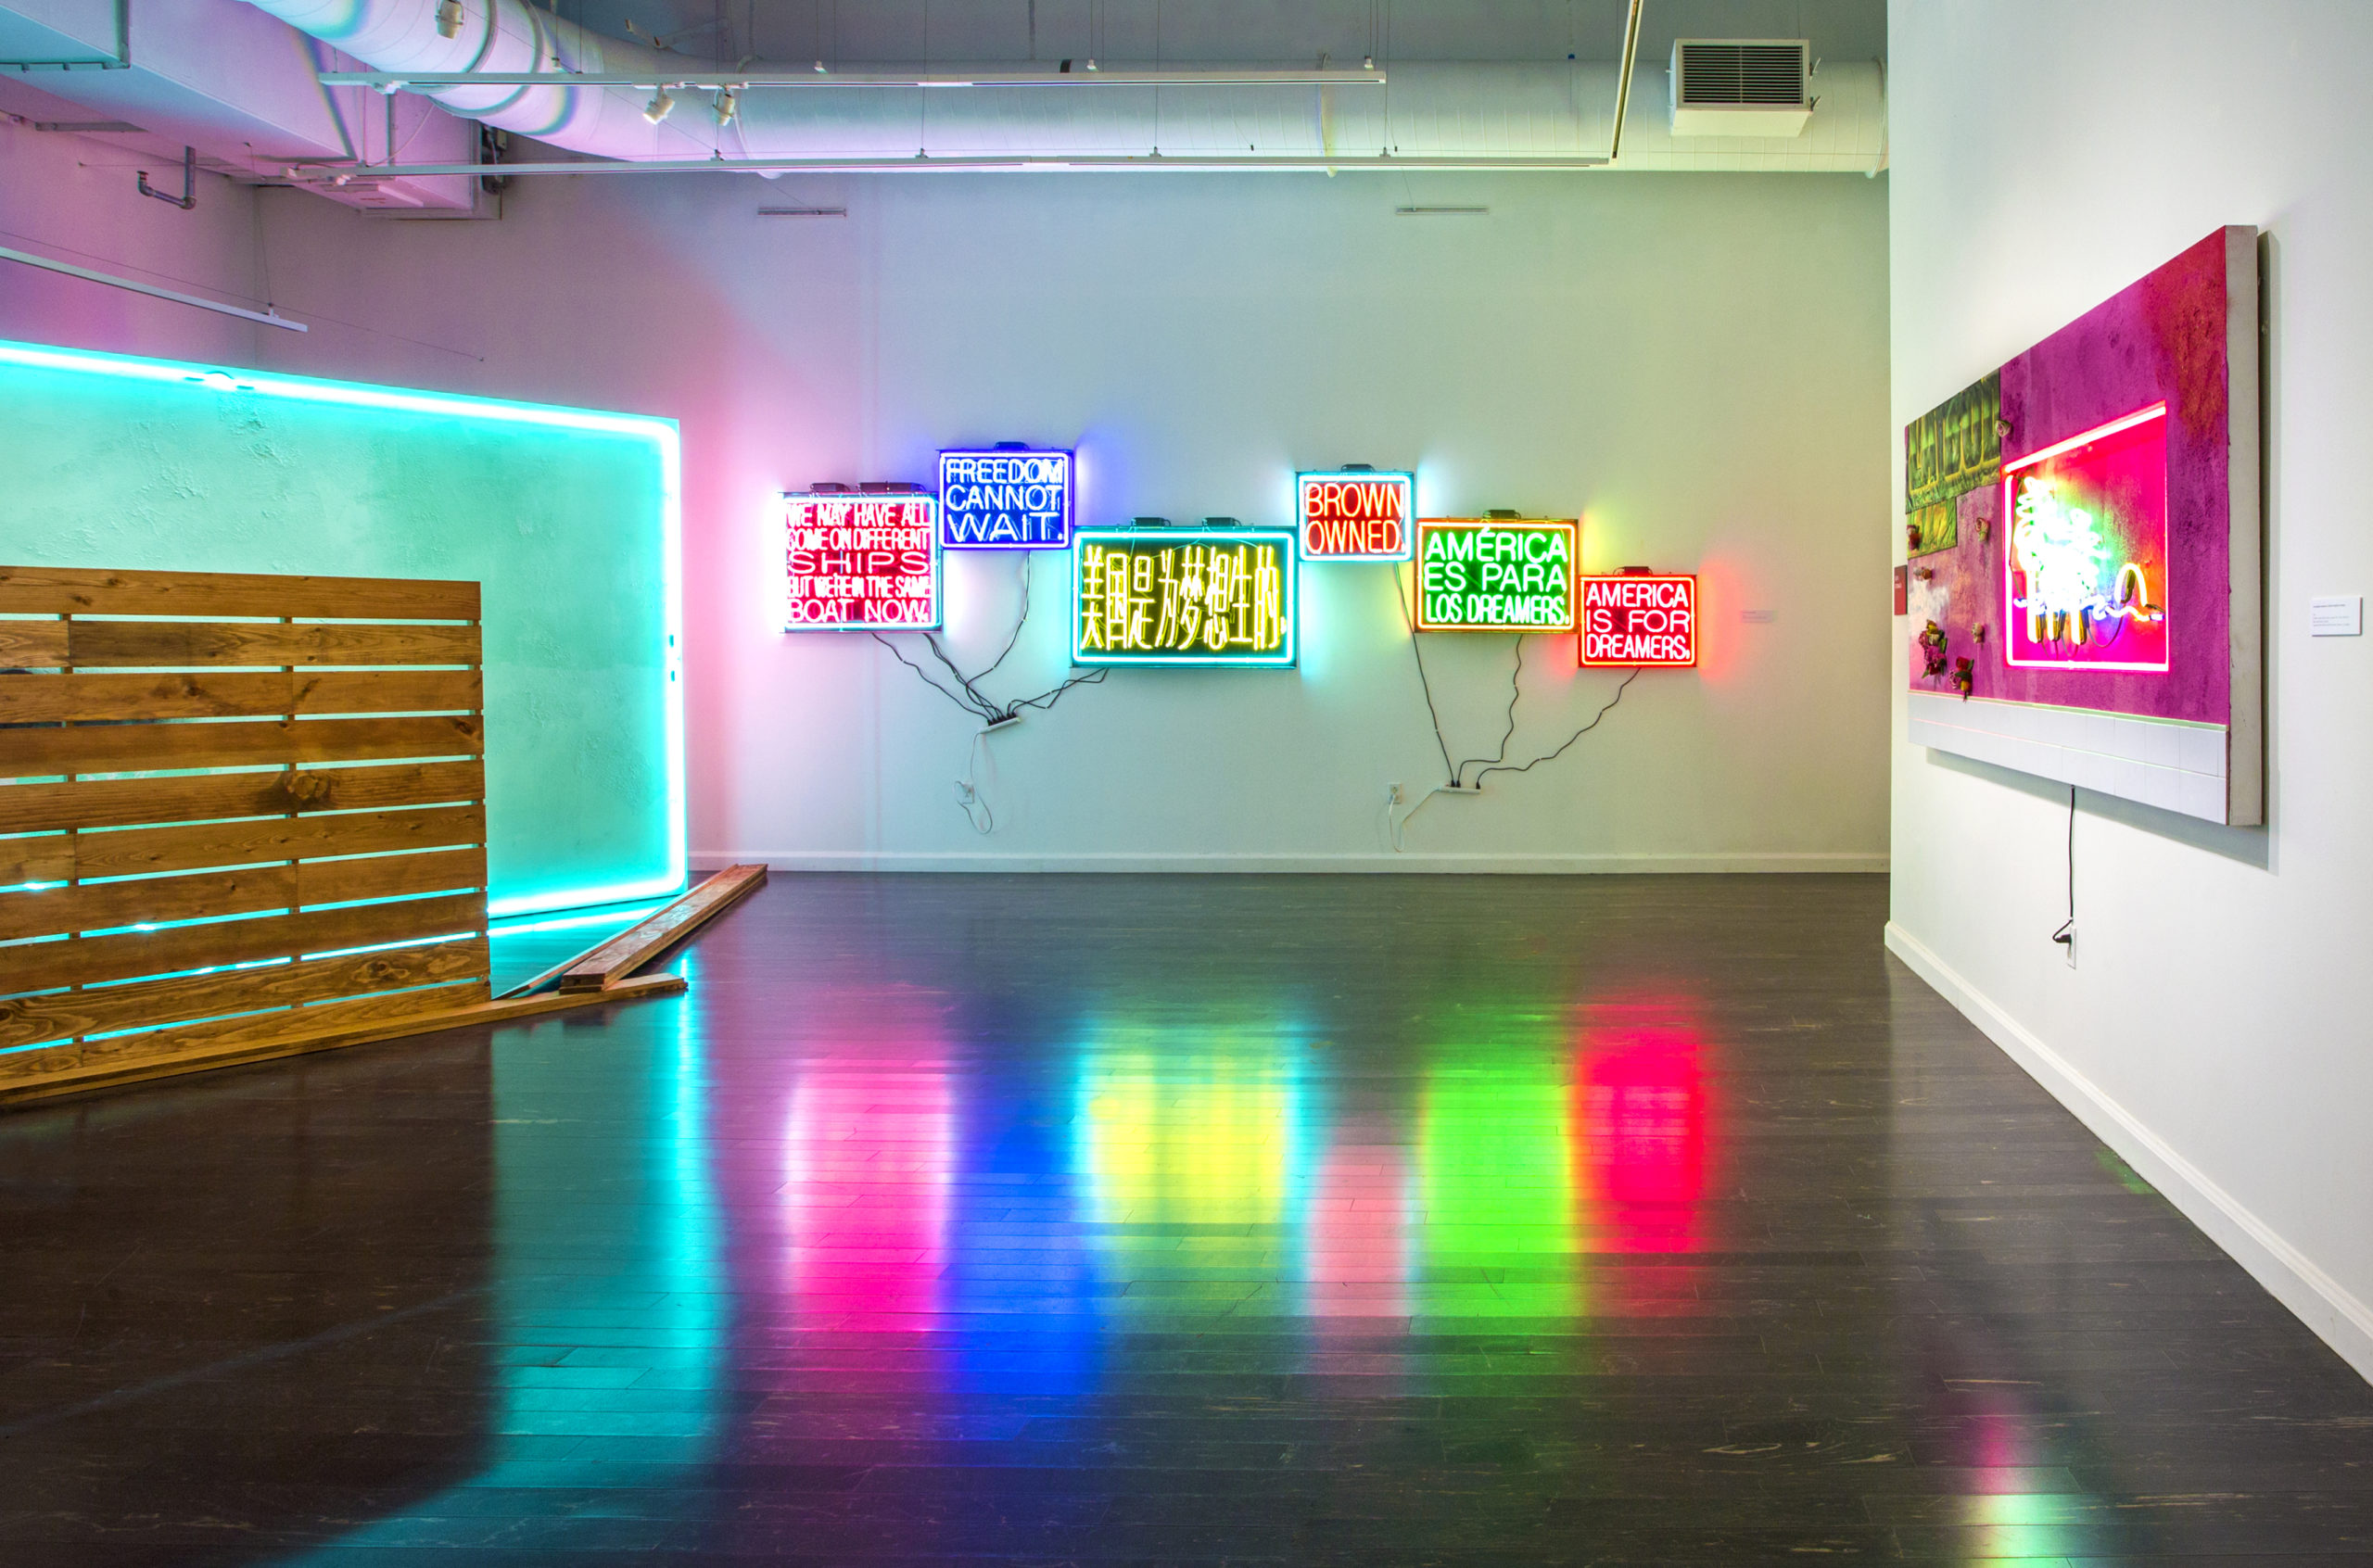 Artwork featuring neon lights installed in a gallery space.